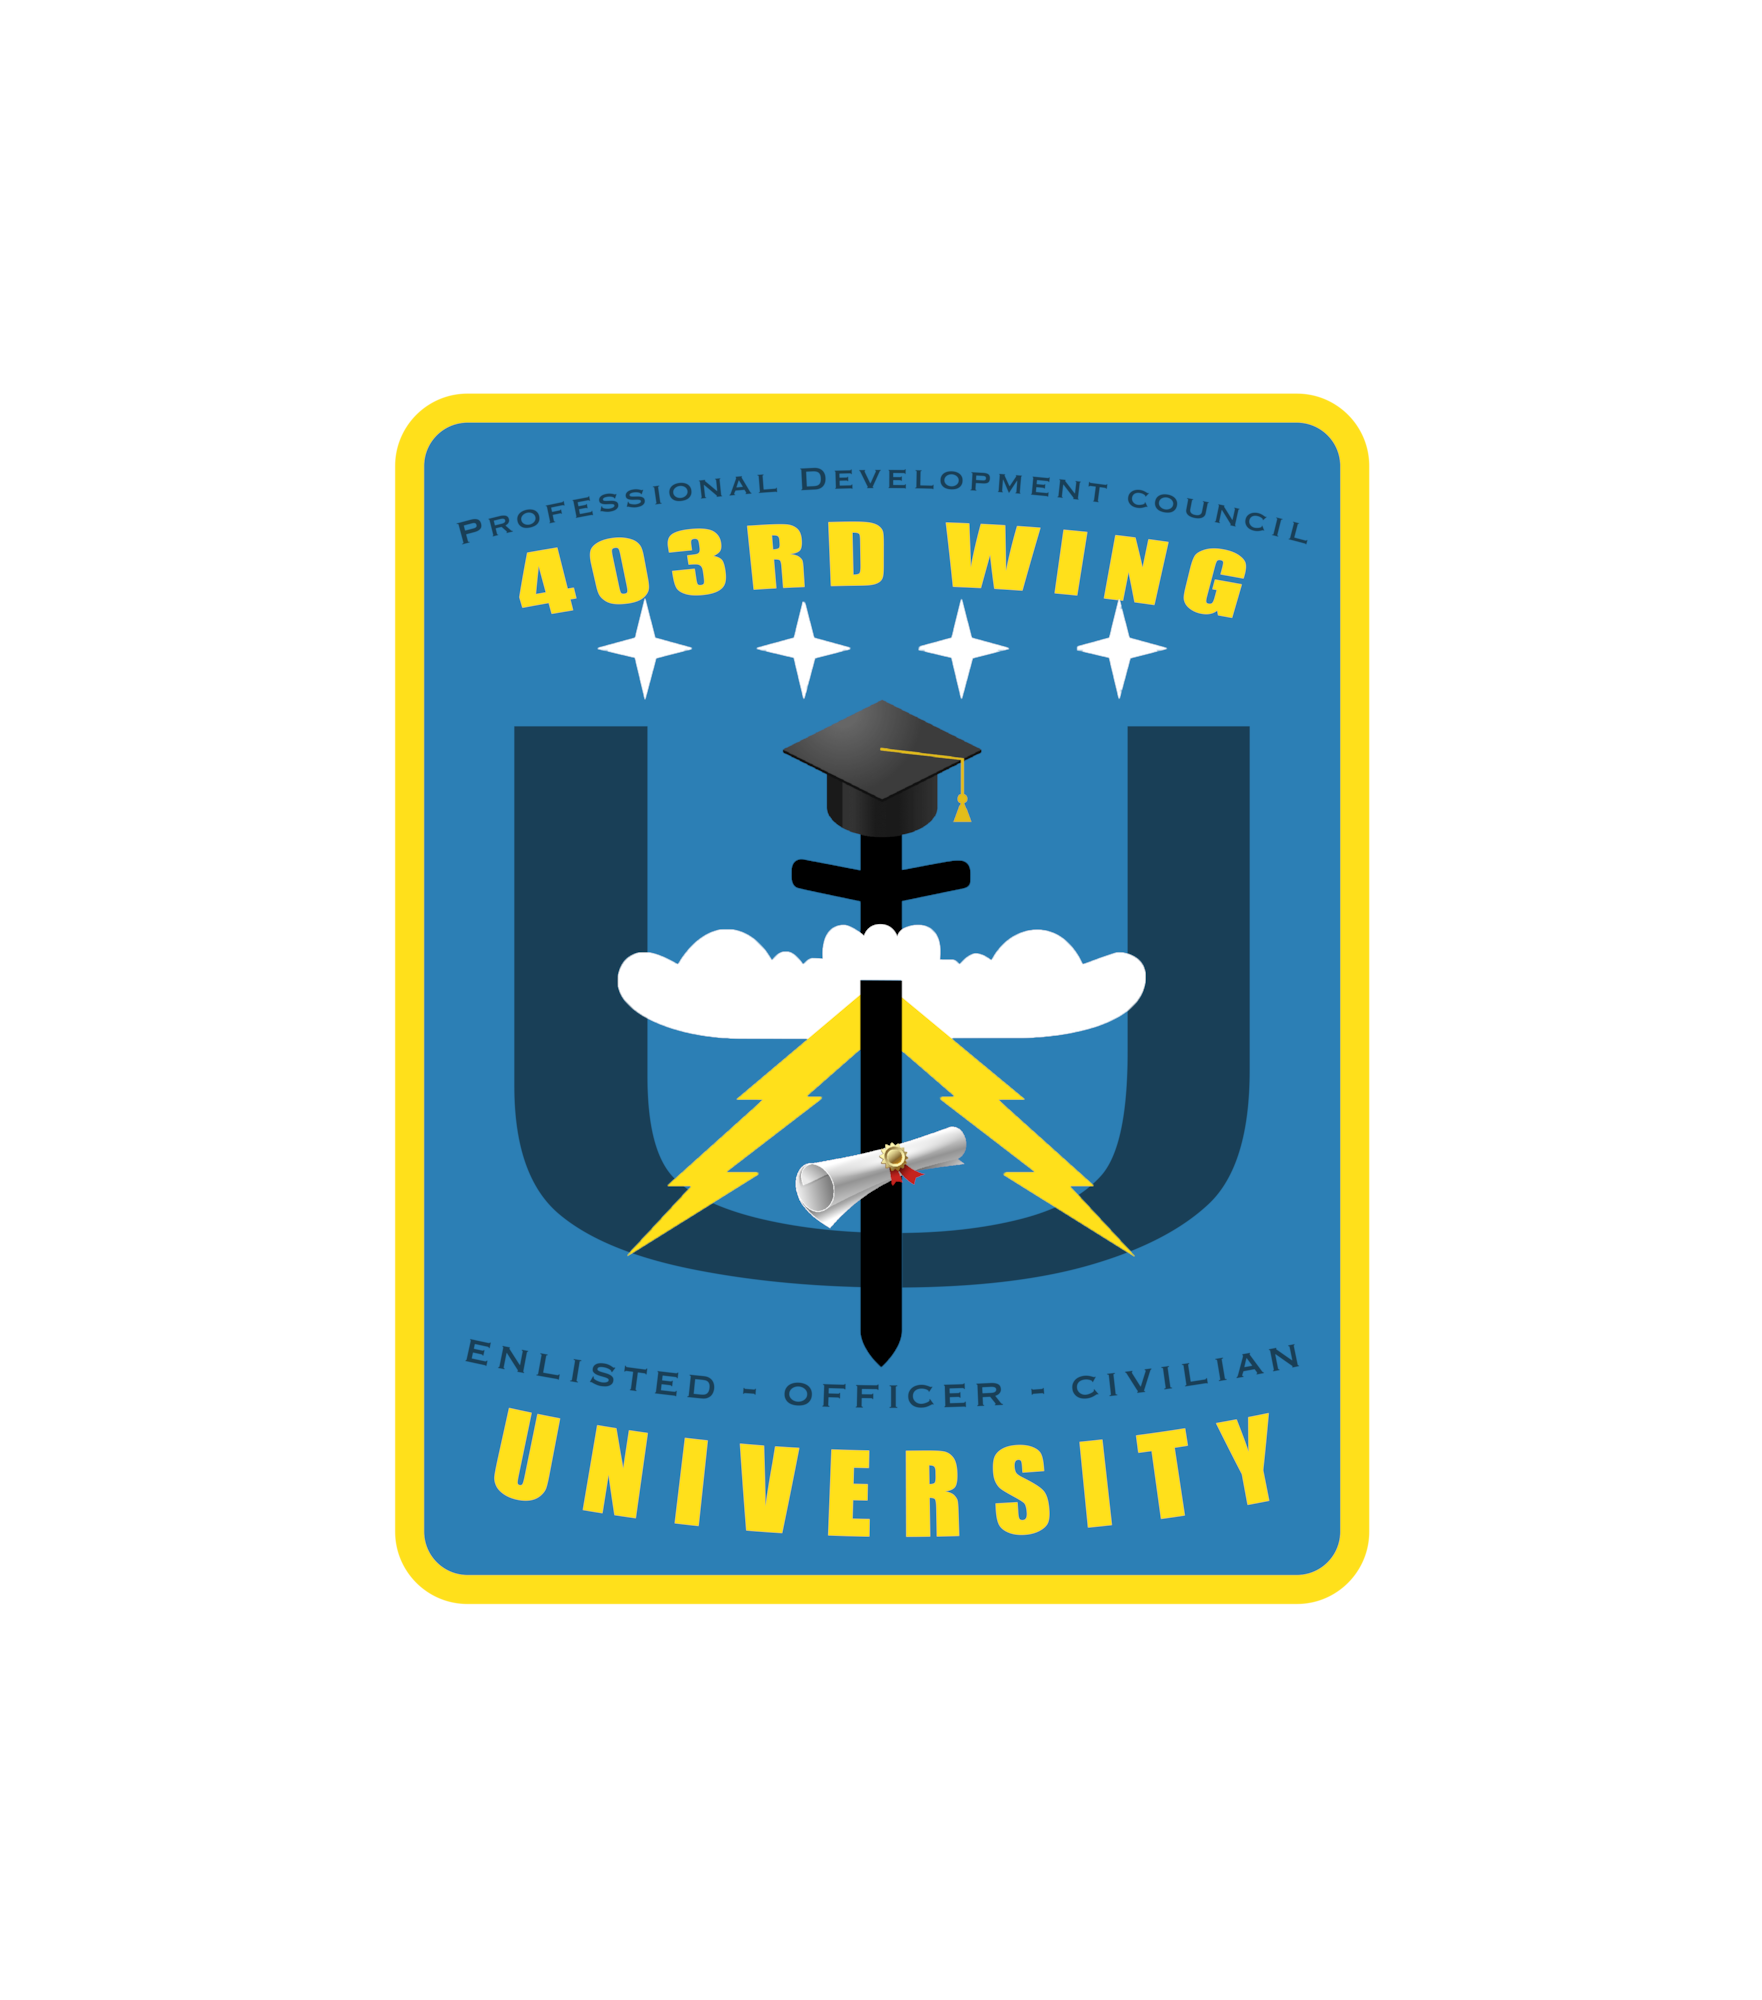 Professional Developement Council, 403rd Wing University. Enlisted, Officer, Civilian.